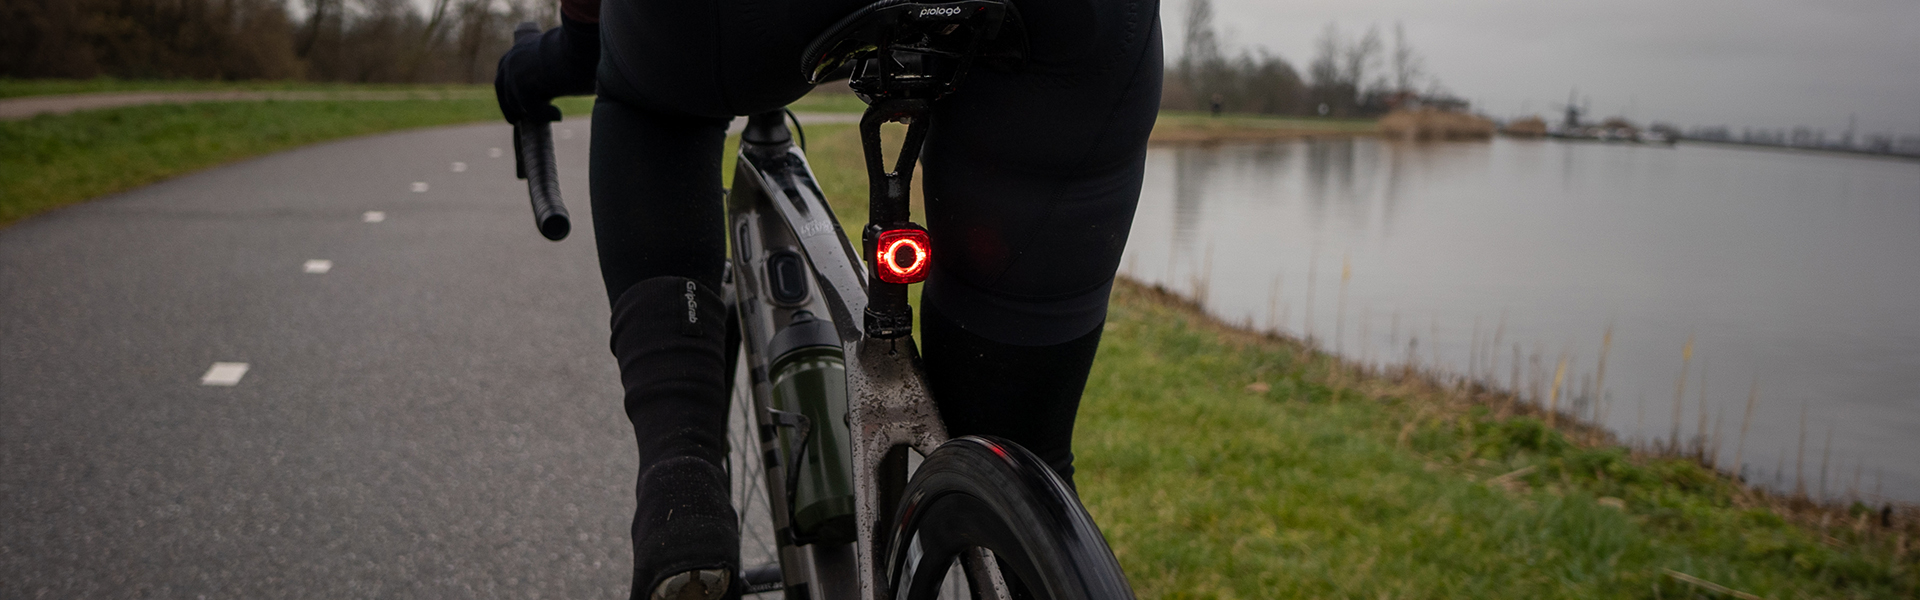 Sate-lite CREE ebike light  StVZO  ISO6742-1 eletric bike tail light with StVZO ECE reflector mount on Carrier 6-58V